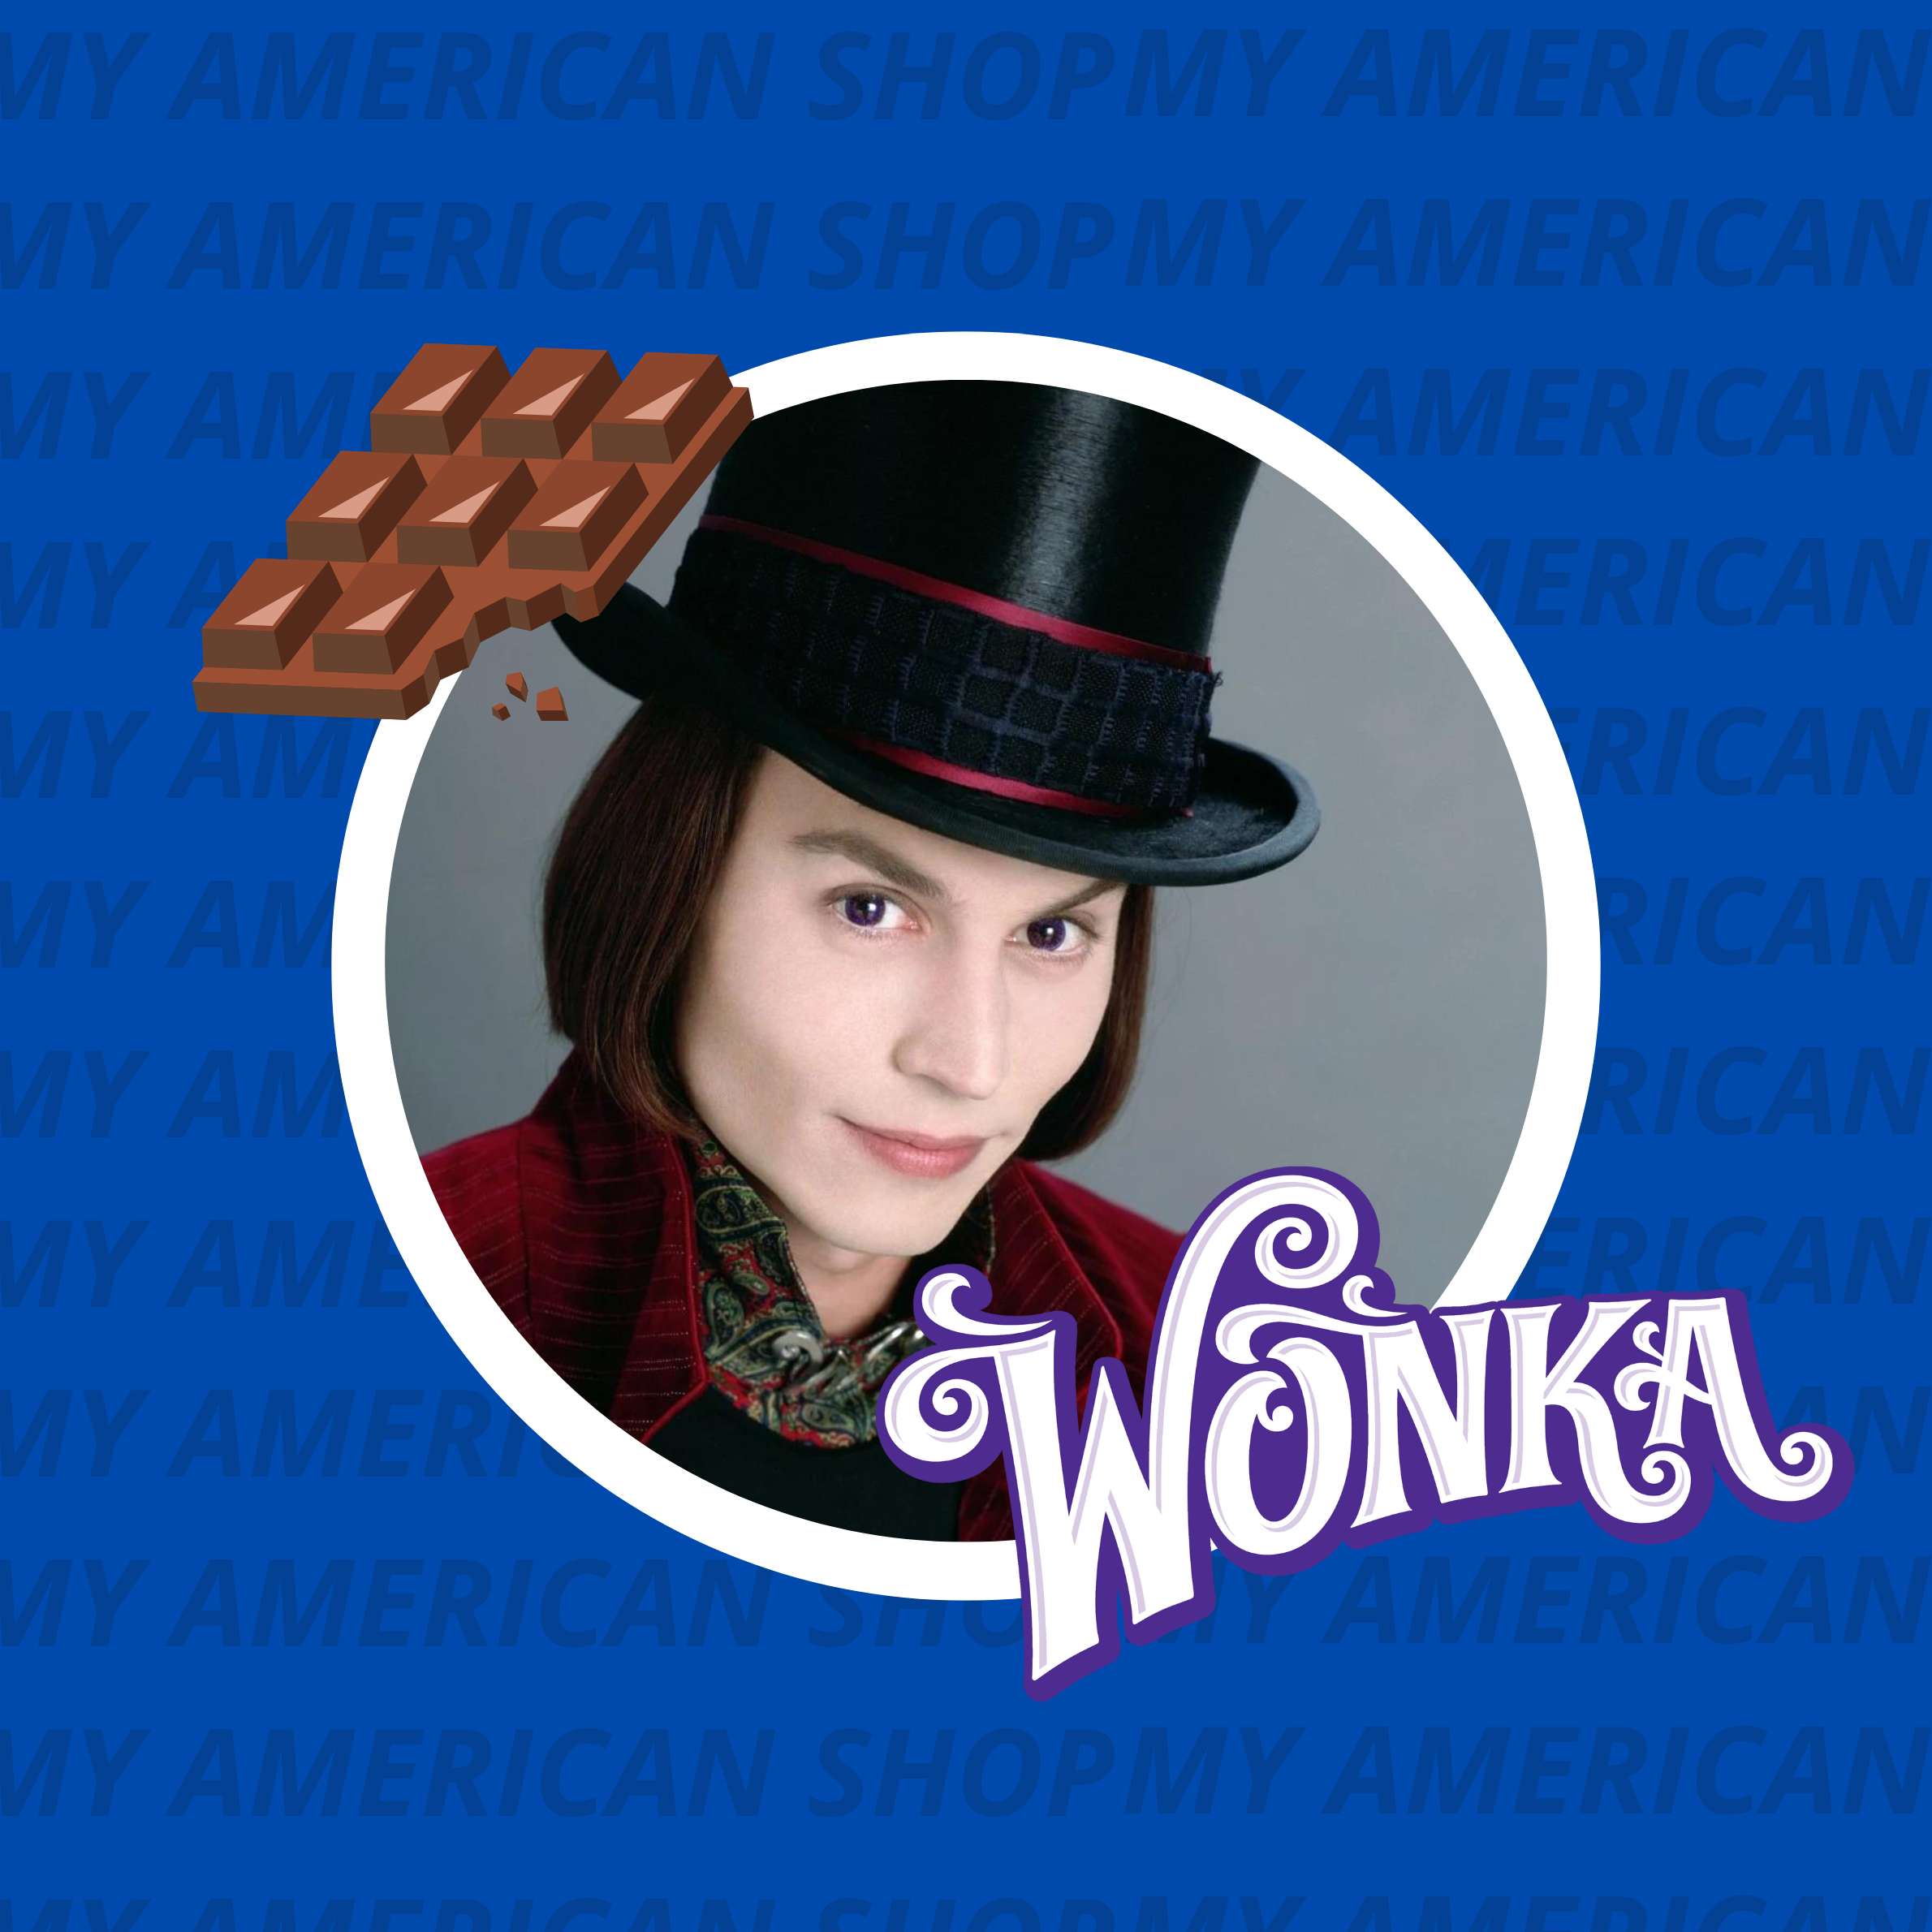 Willy Wonka Charlie et la Chocolaterie Personnages imprimables